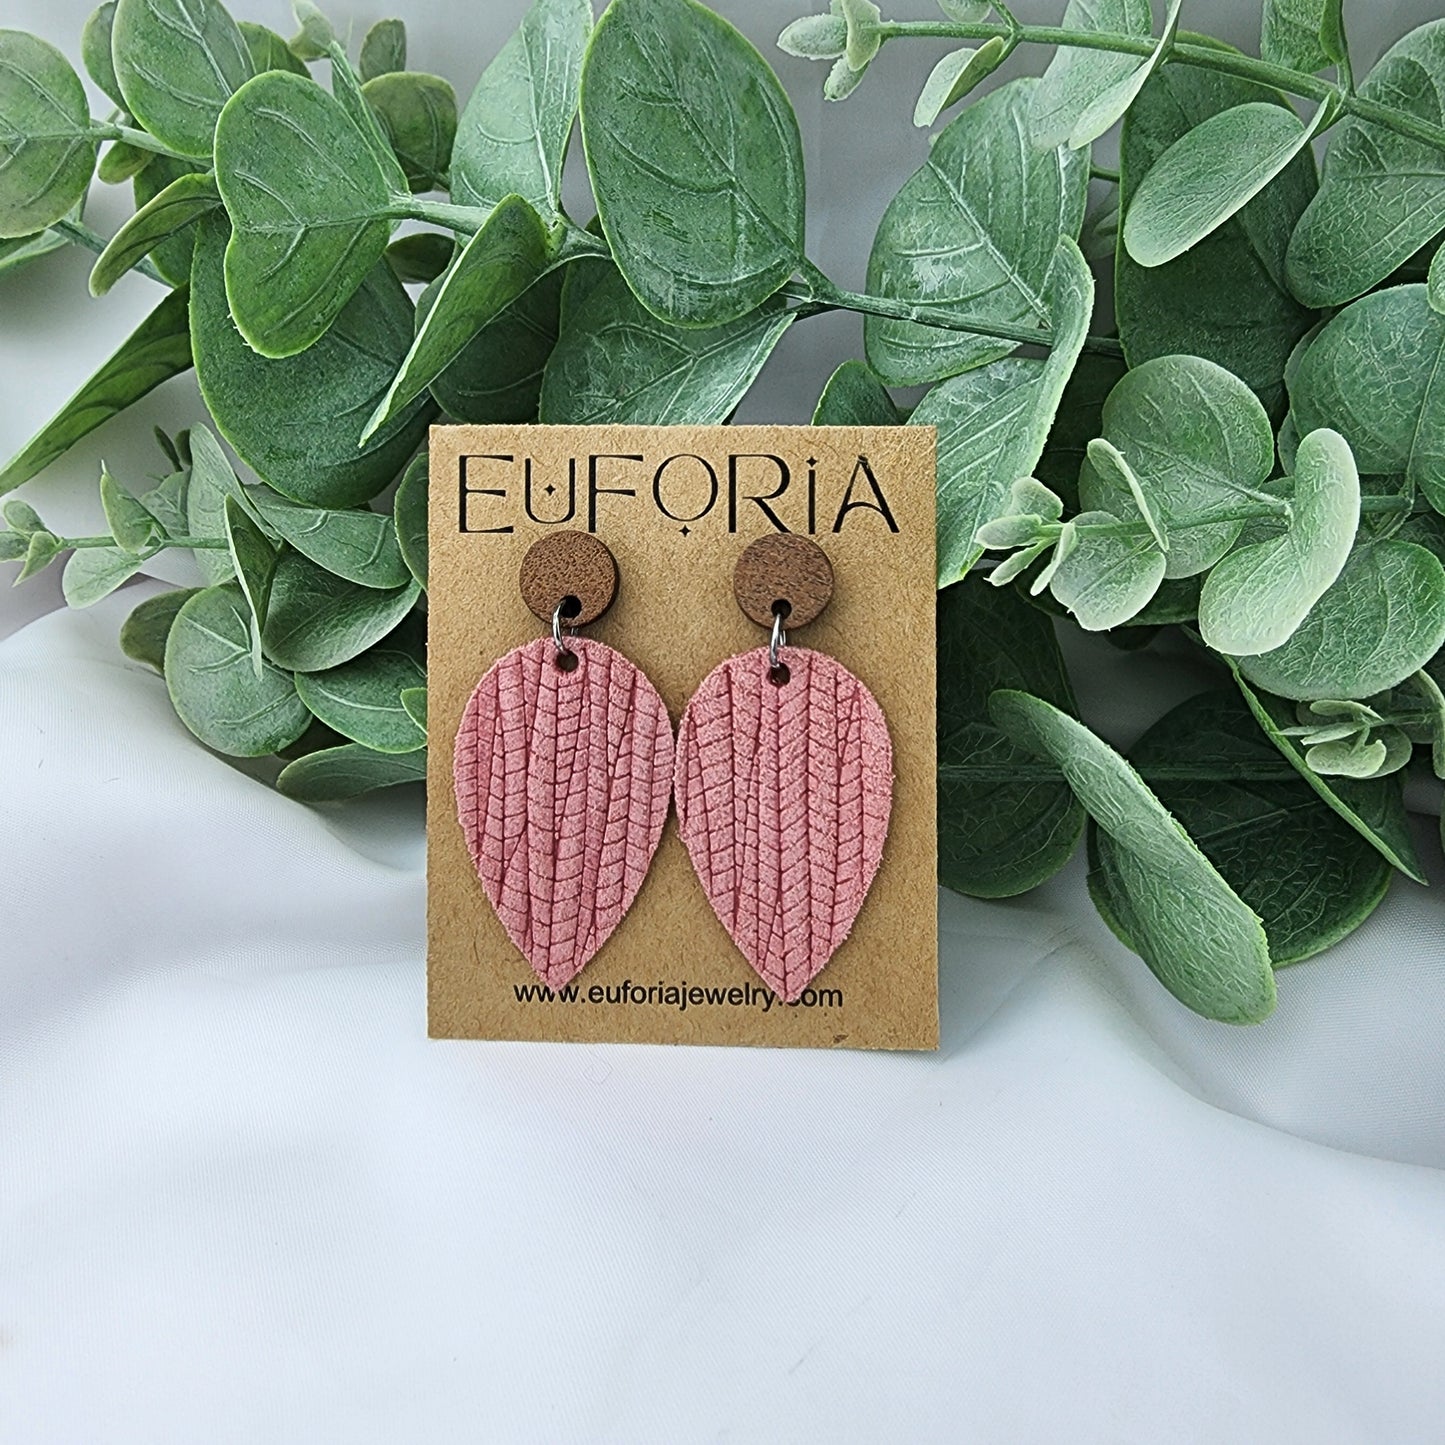 Leather teardrop earrings with round wood post. Salmon pink, woven palm leaf texture.